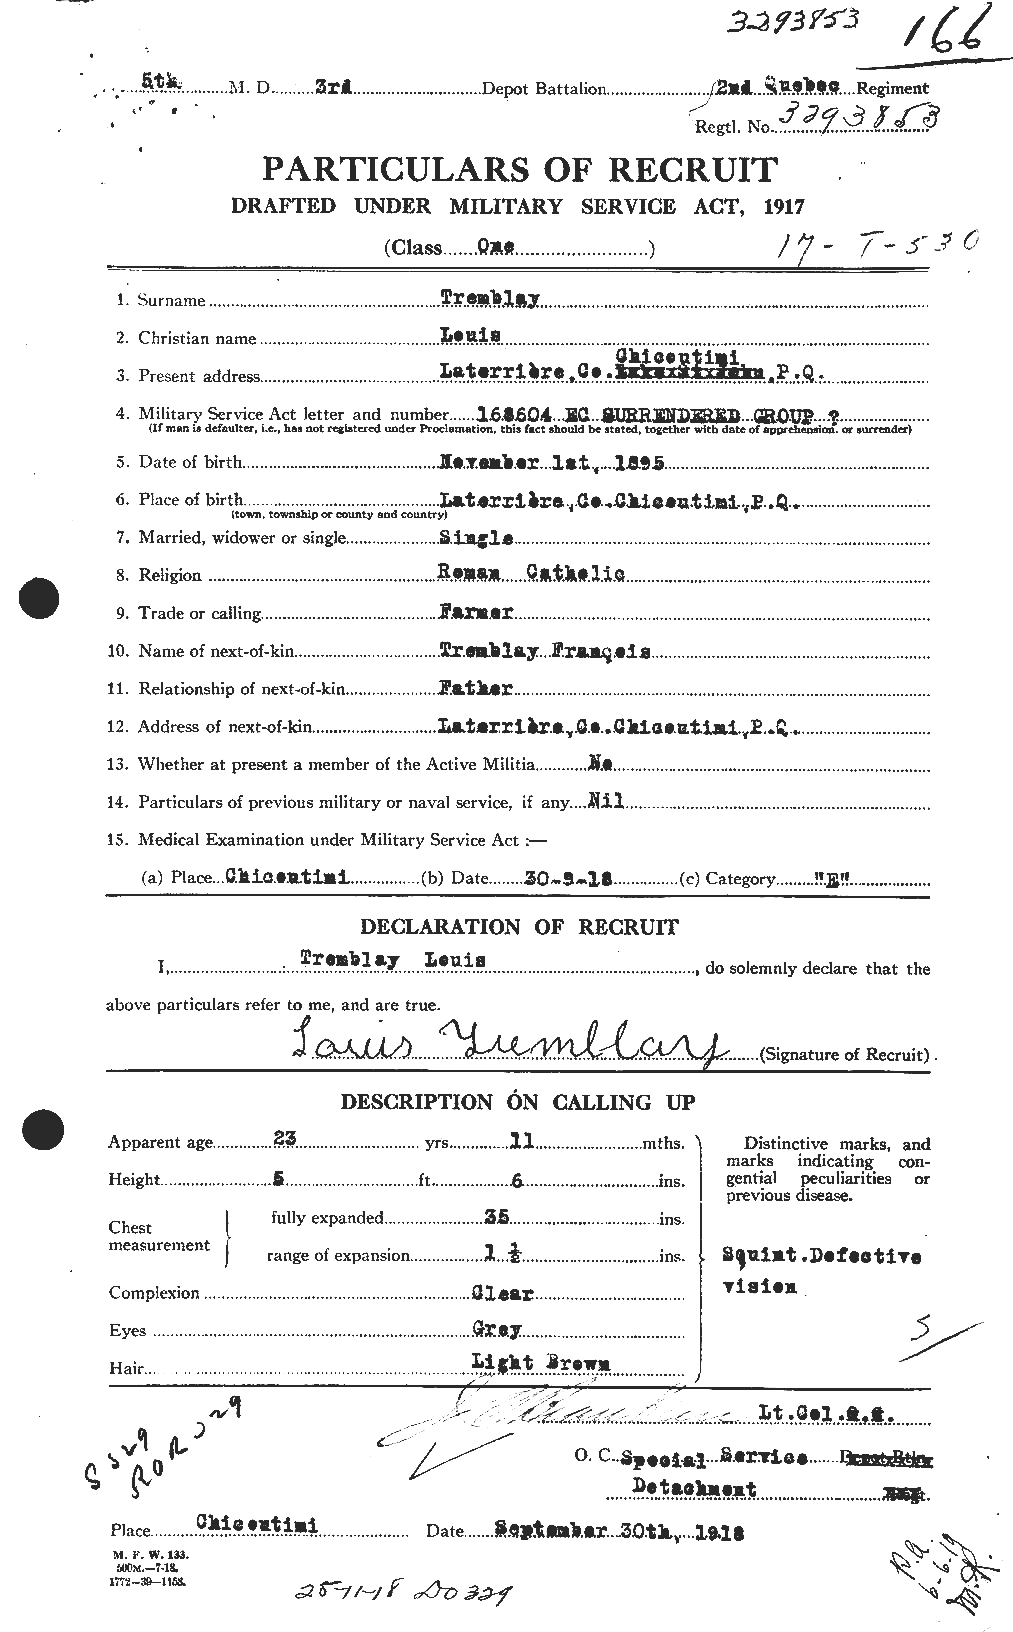 Personnel Records of the First World War - CEF 639186a